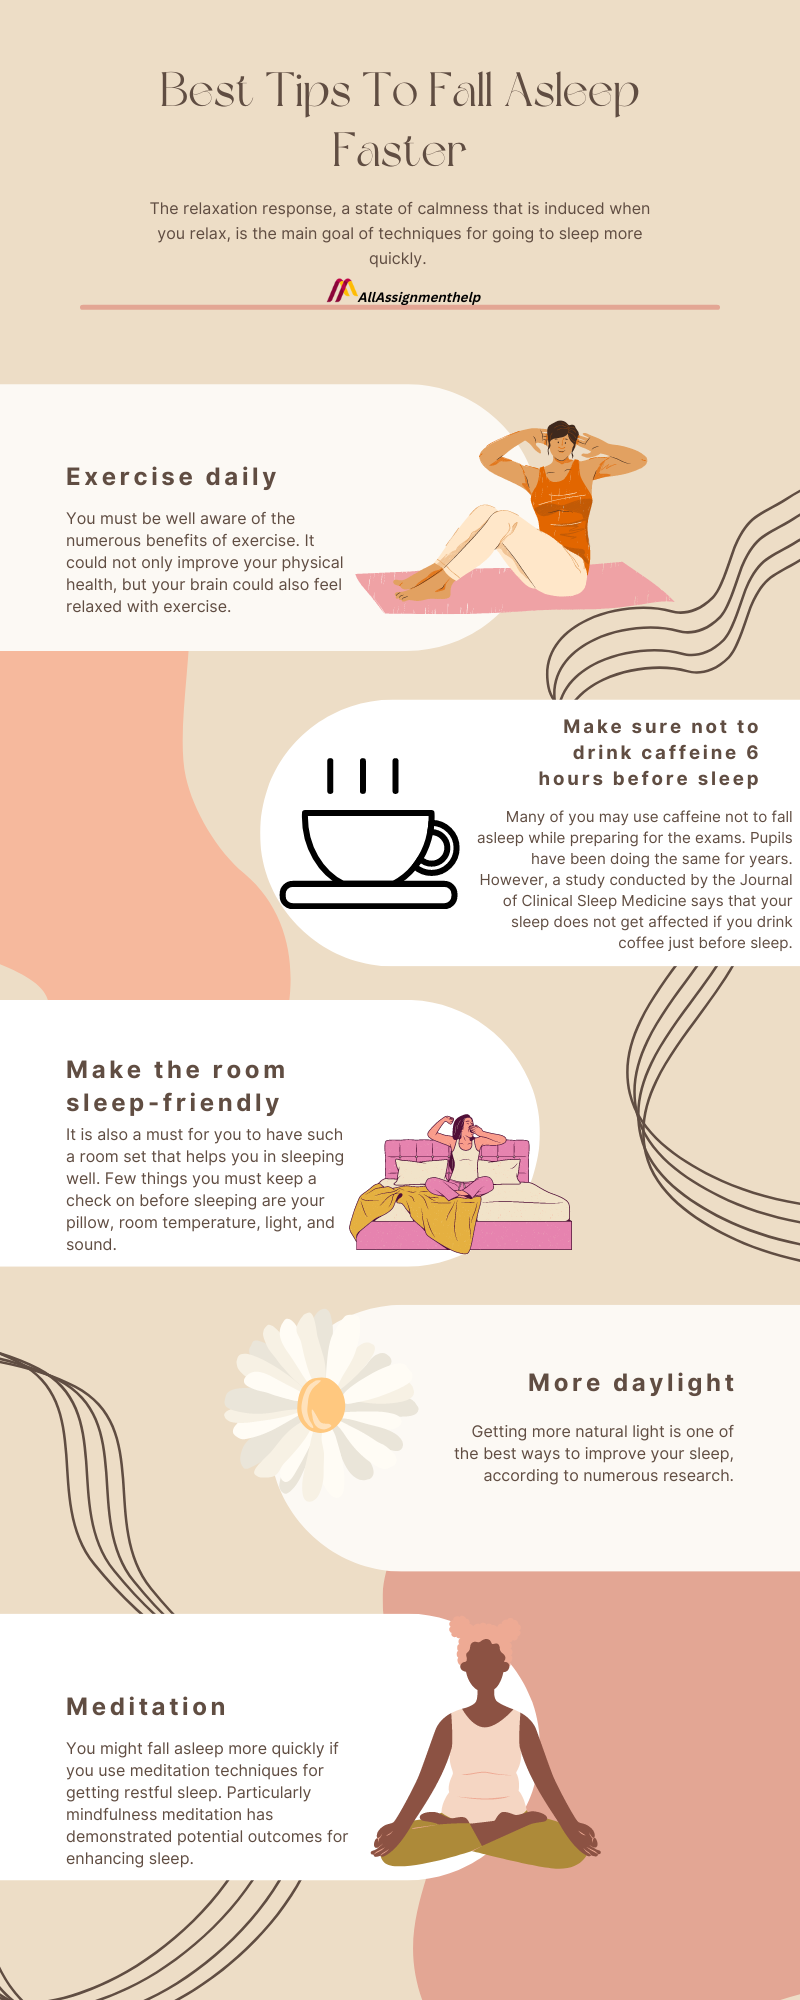 Best Tips For Fall Asleep Faster